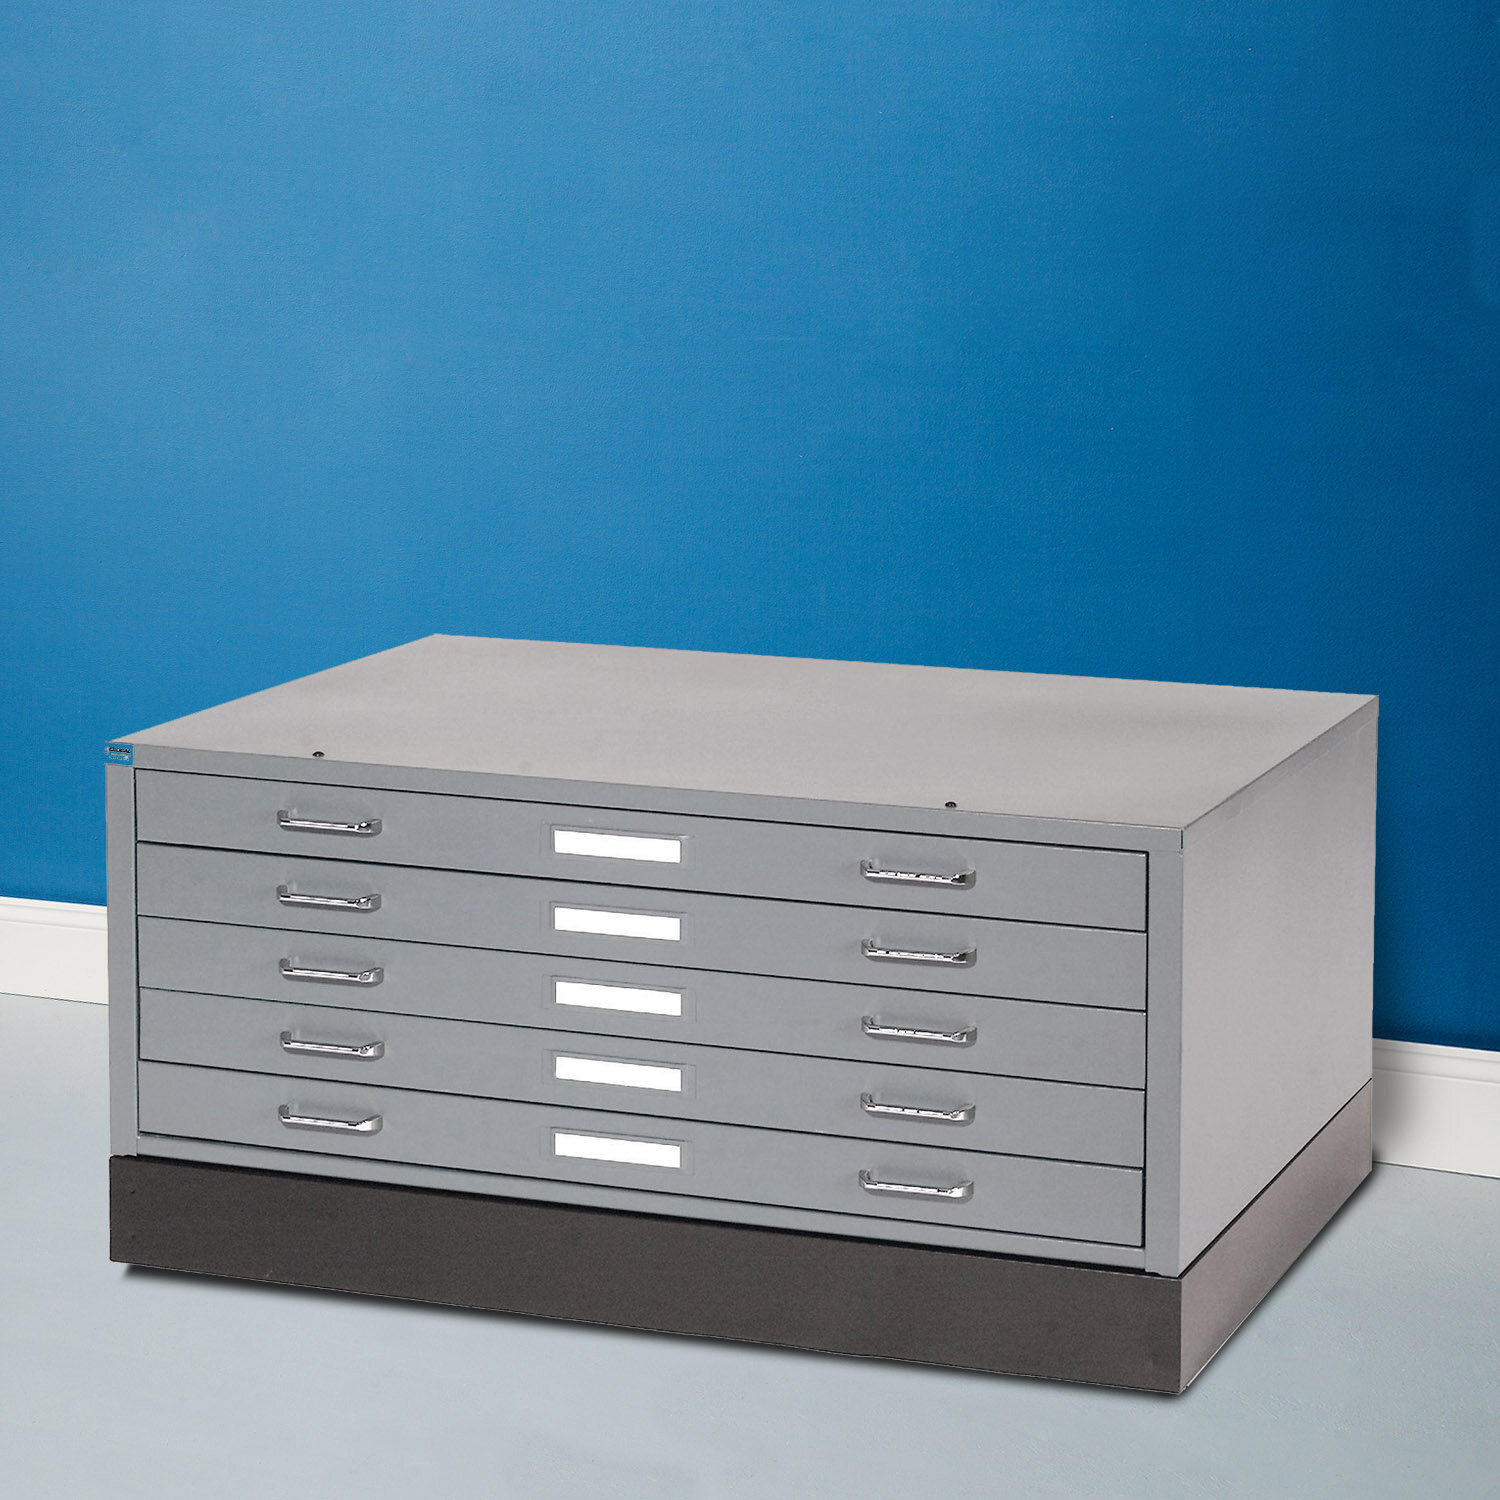 Green Stackable 5-Drawer Flat File Cabinet